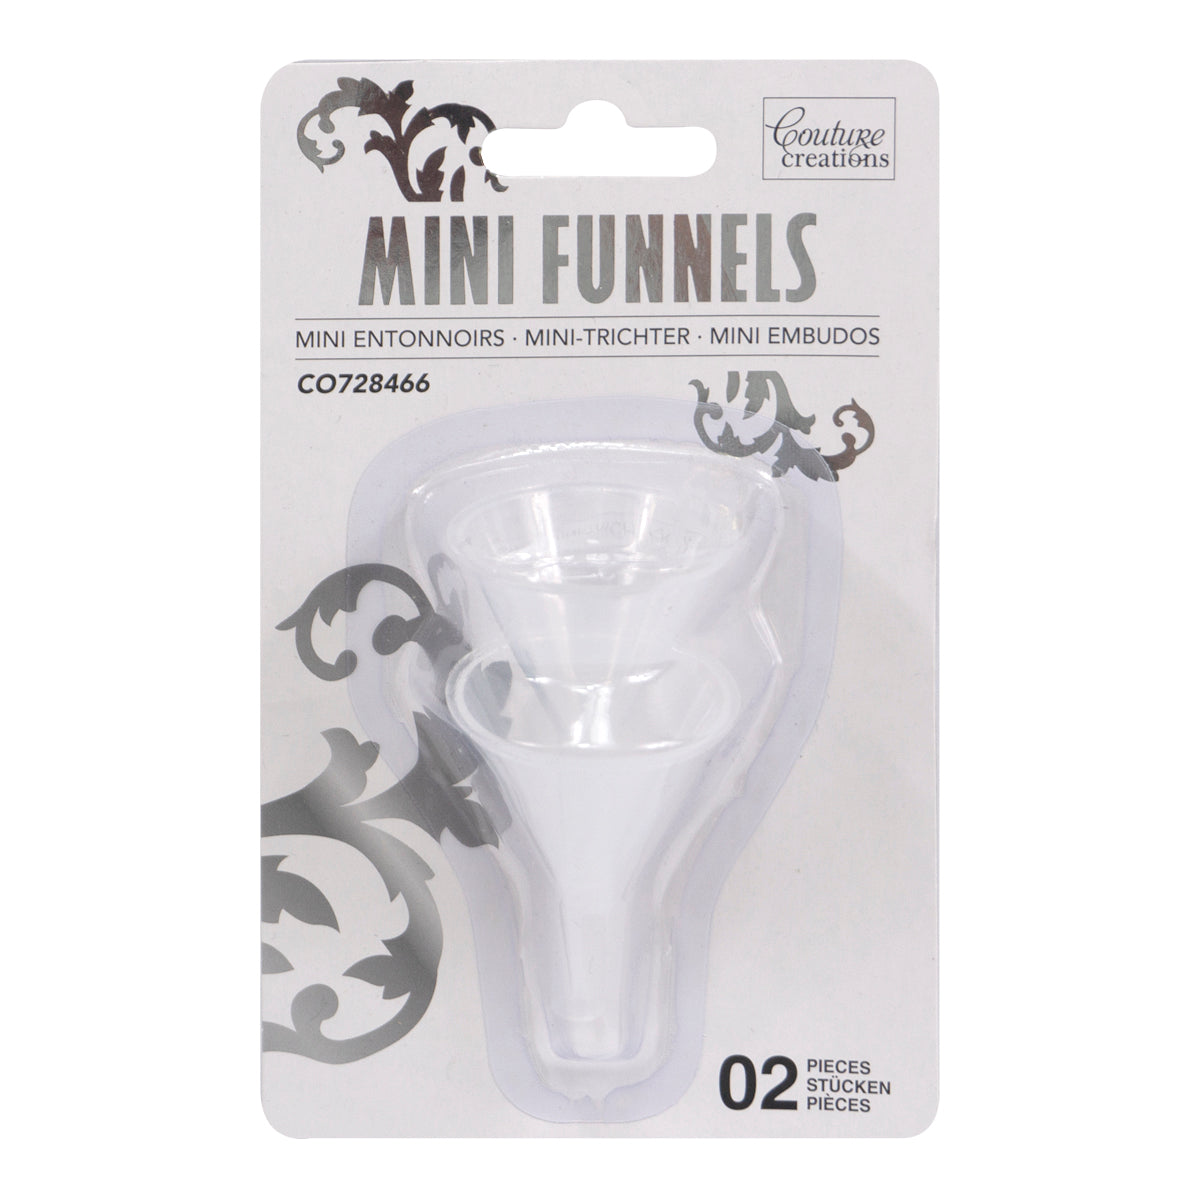 Couture Creations - Mini Funnels (2pc)